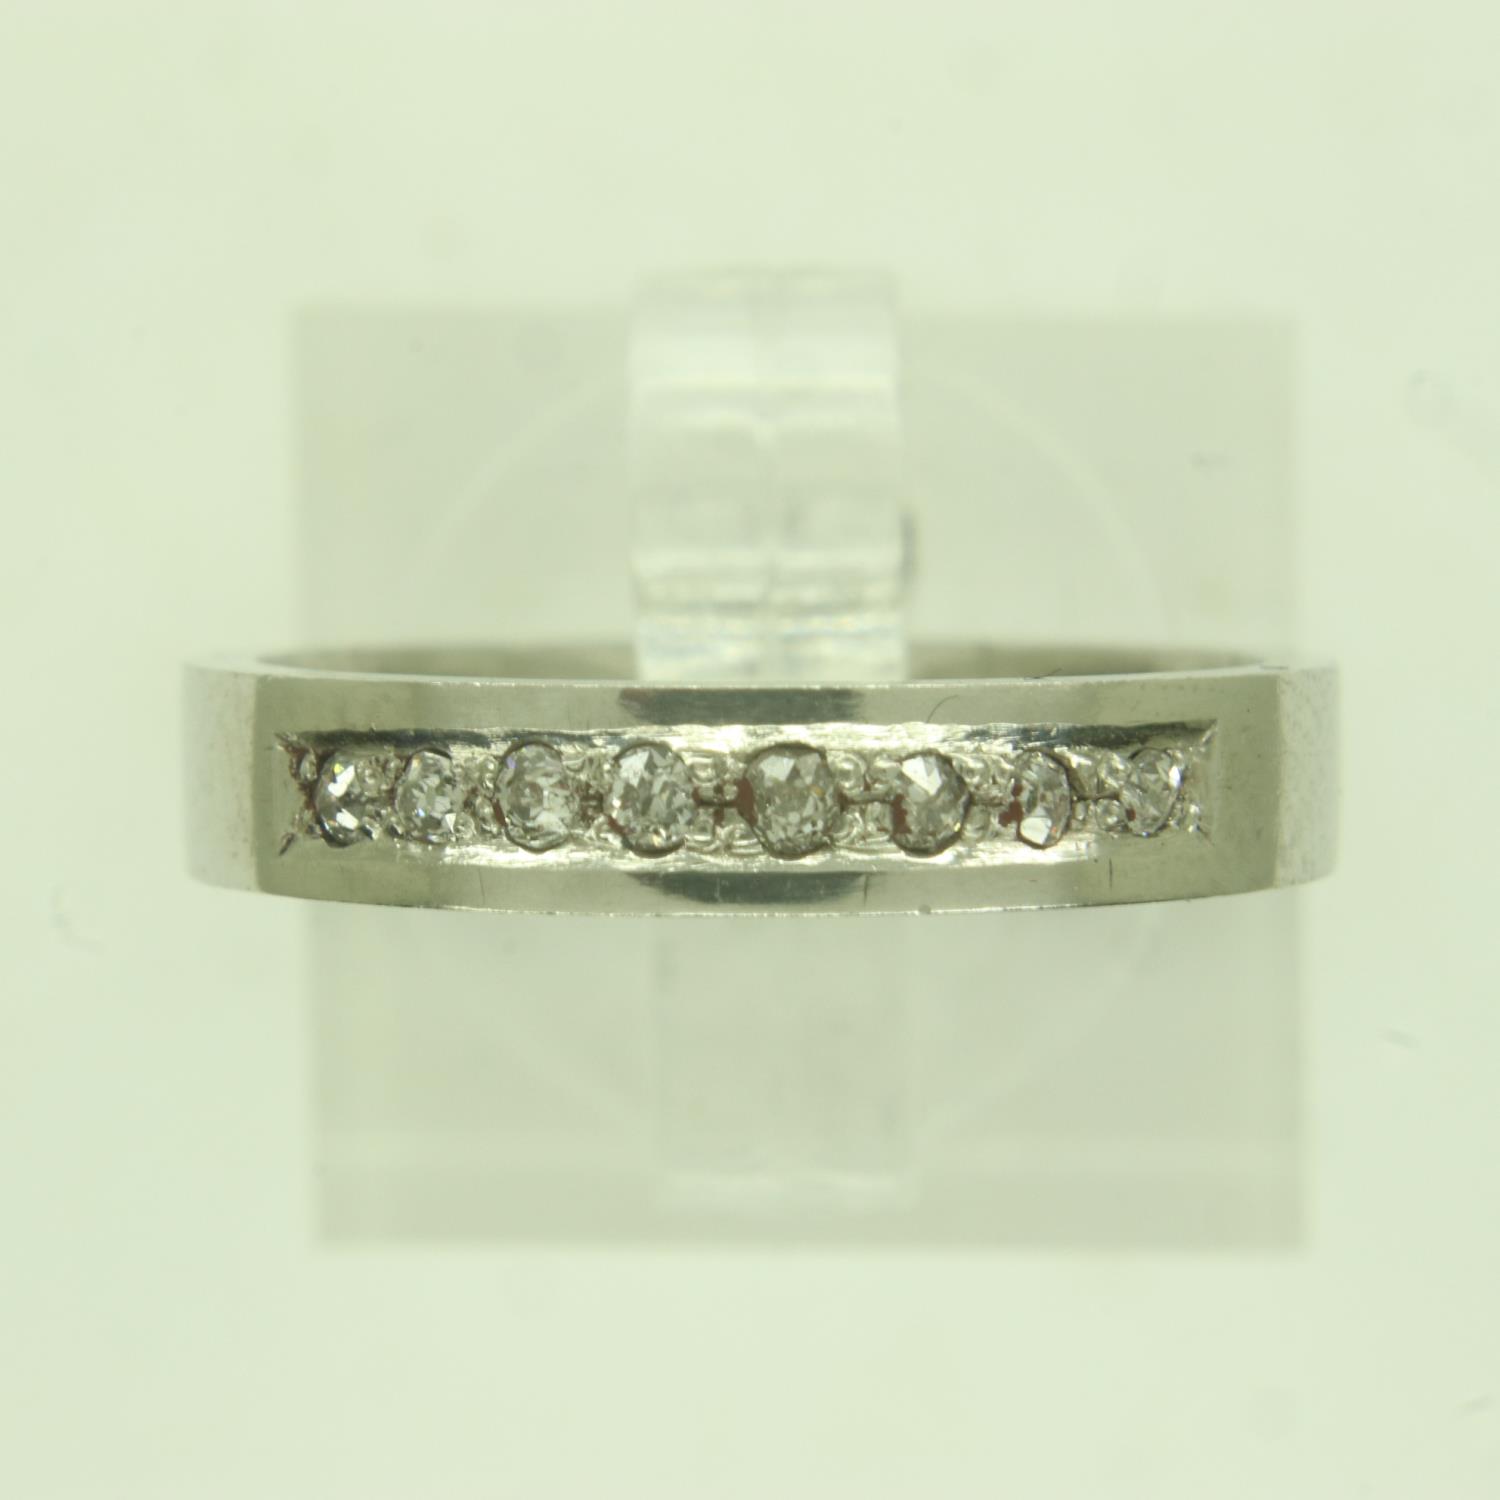 Contemporary platinum band ring, channel-set with eight diamonds, size M/N, 5.4g. UK P&P Group 0 (£